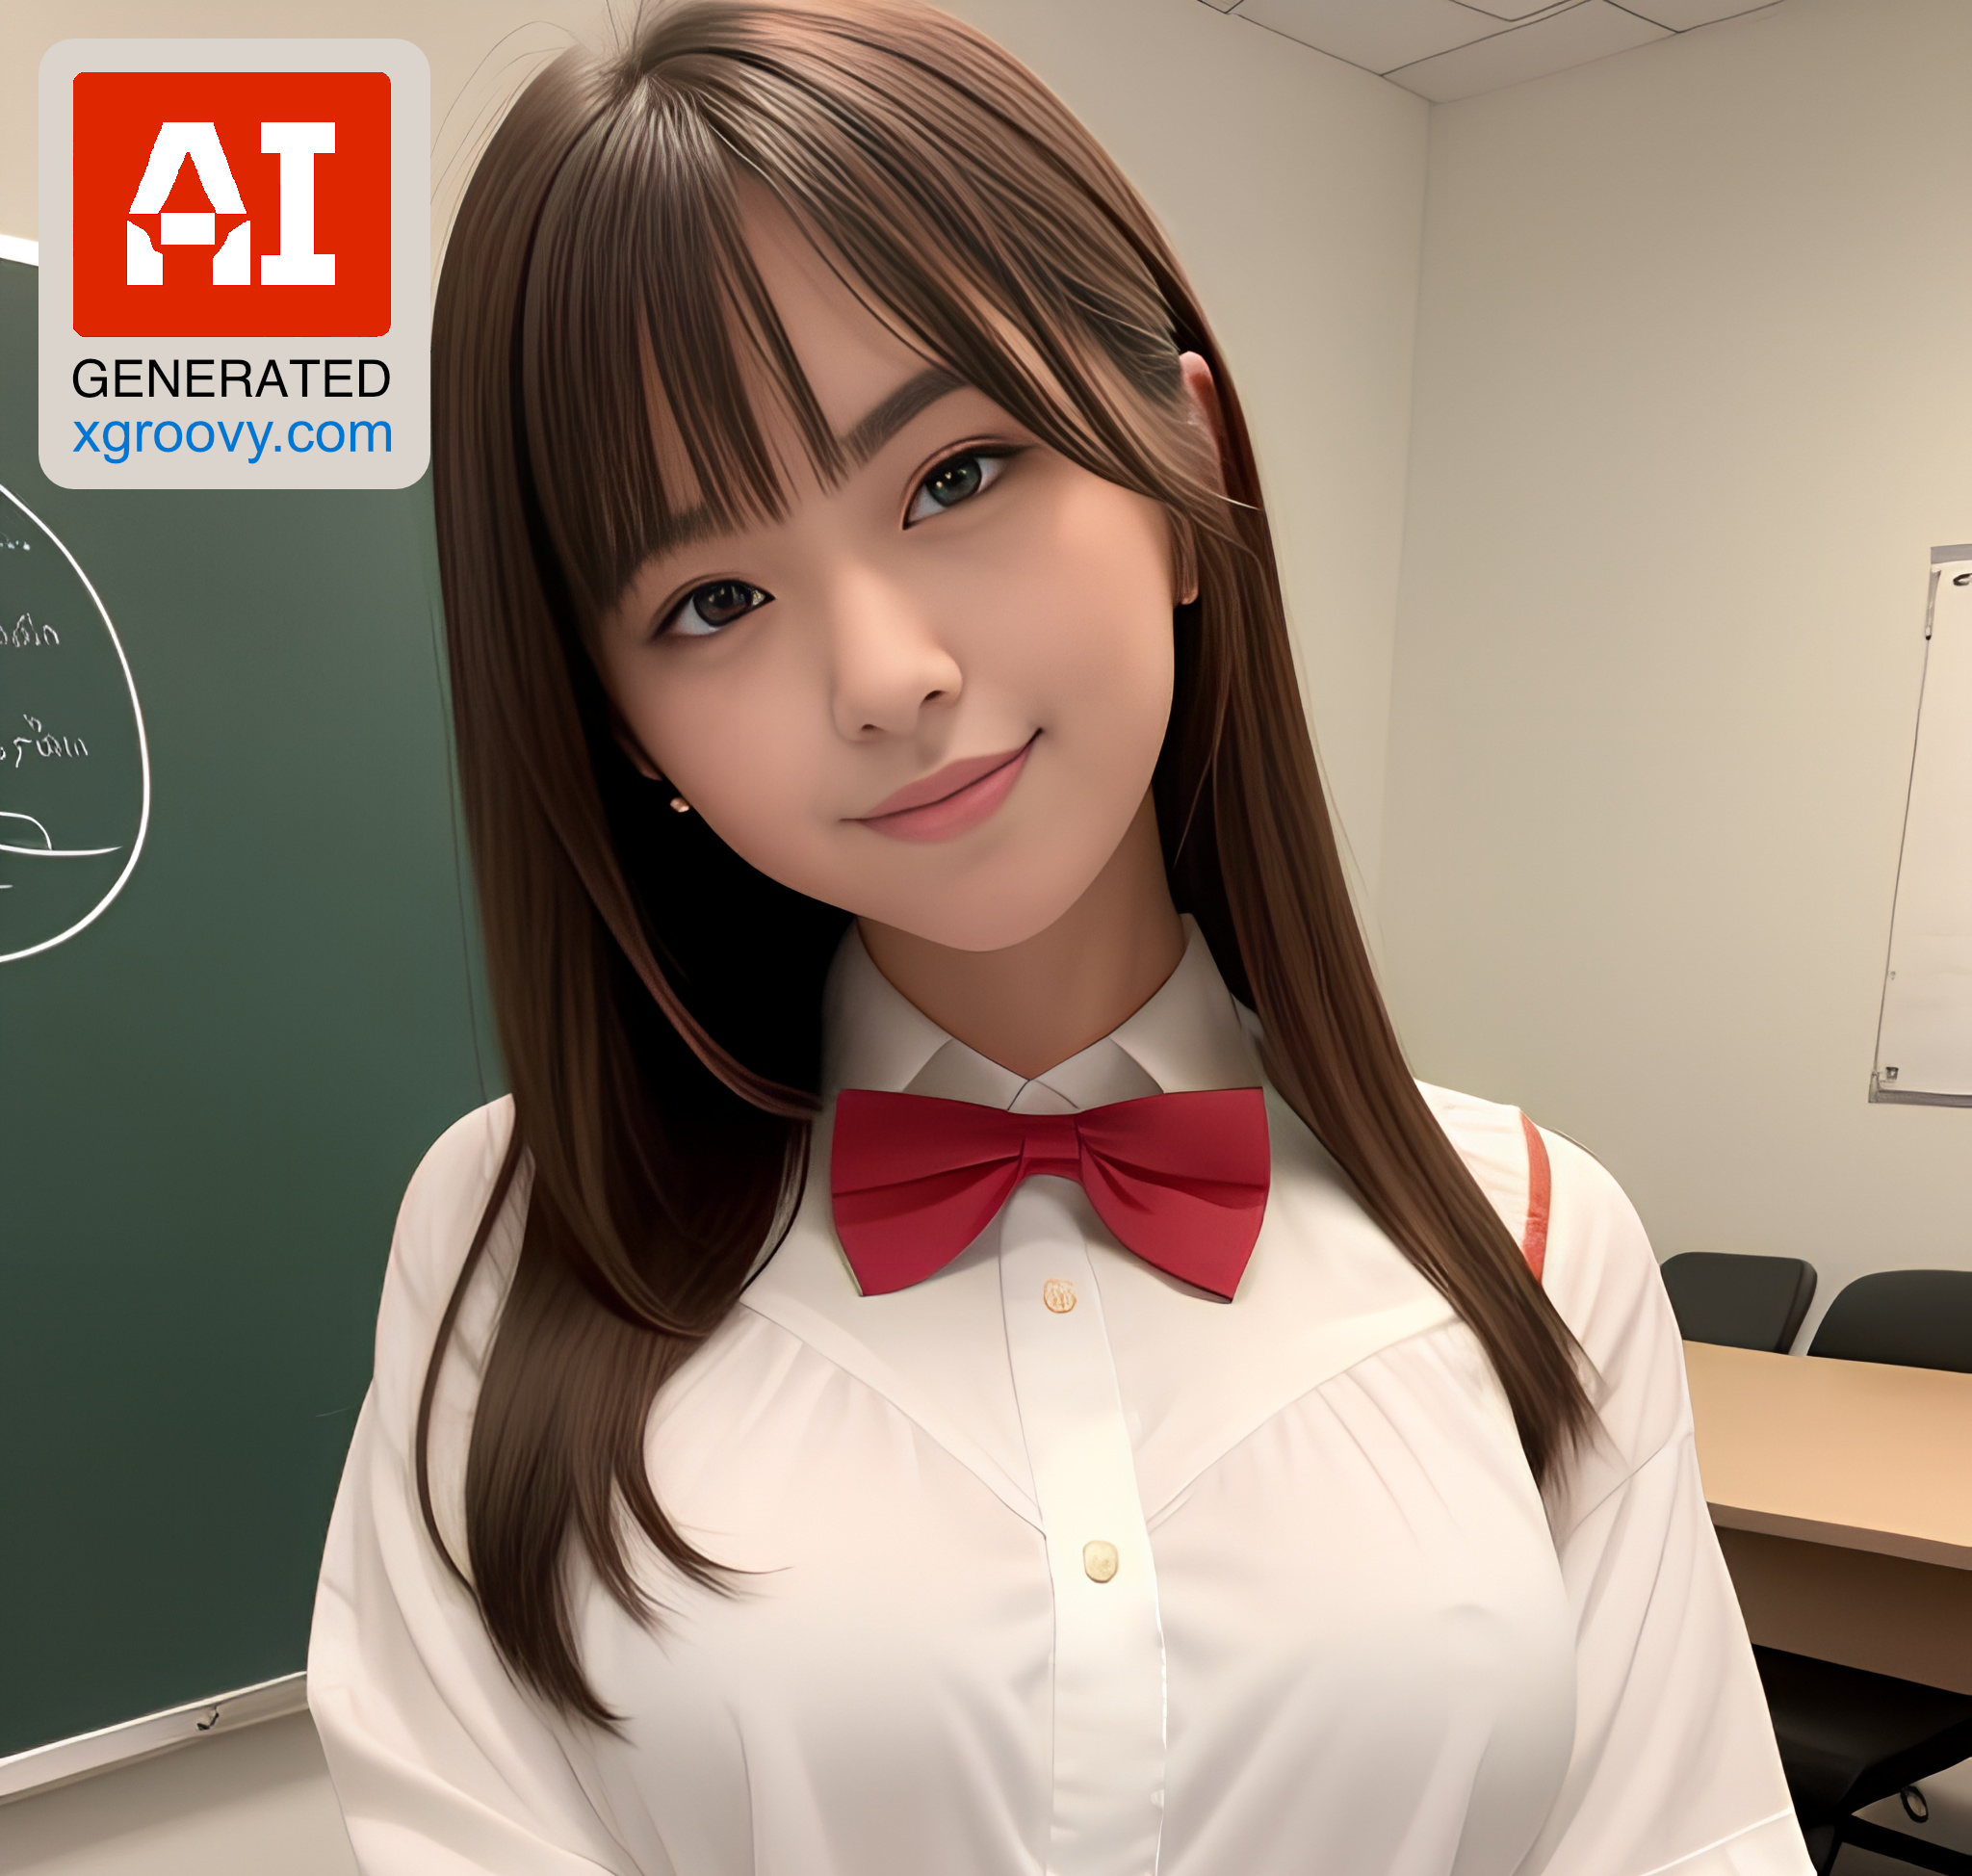 18 Yo Japanese Porn - Kneeling in her blouse and bow tie, this 18yo Japanese beauty teases the  camera with her small tits. - AI Generated Porn Pic - XGROOVY.COM